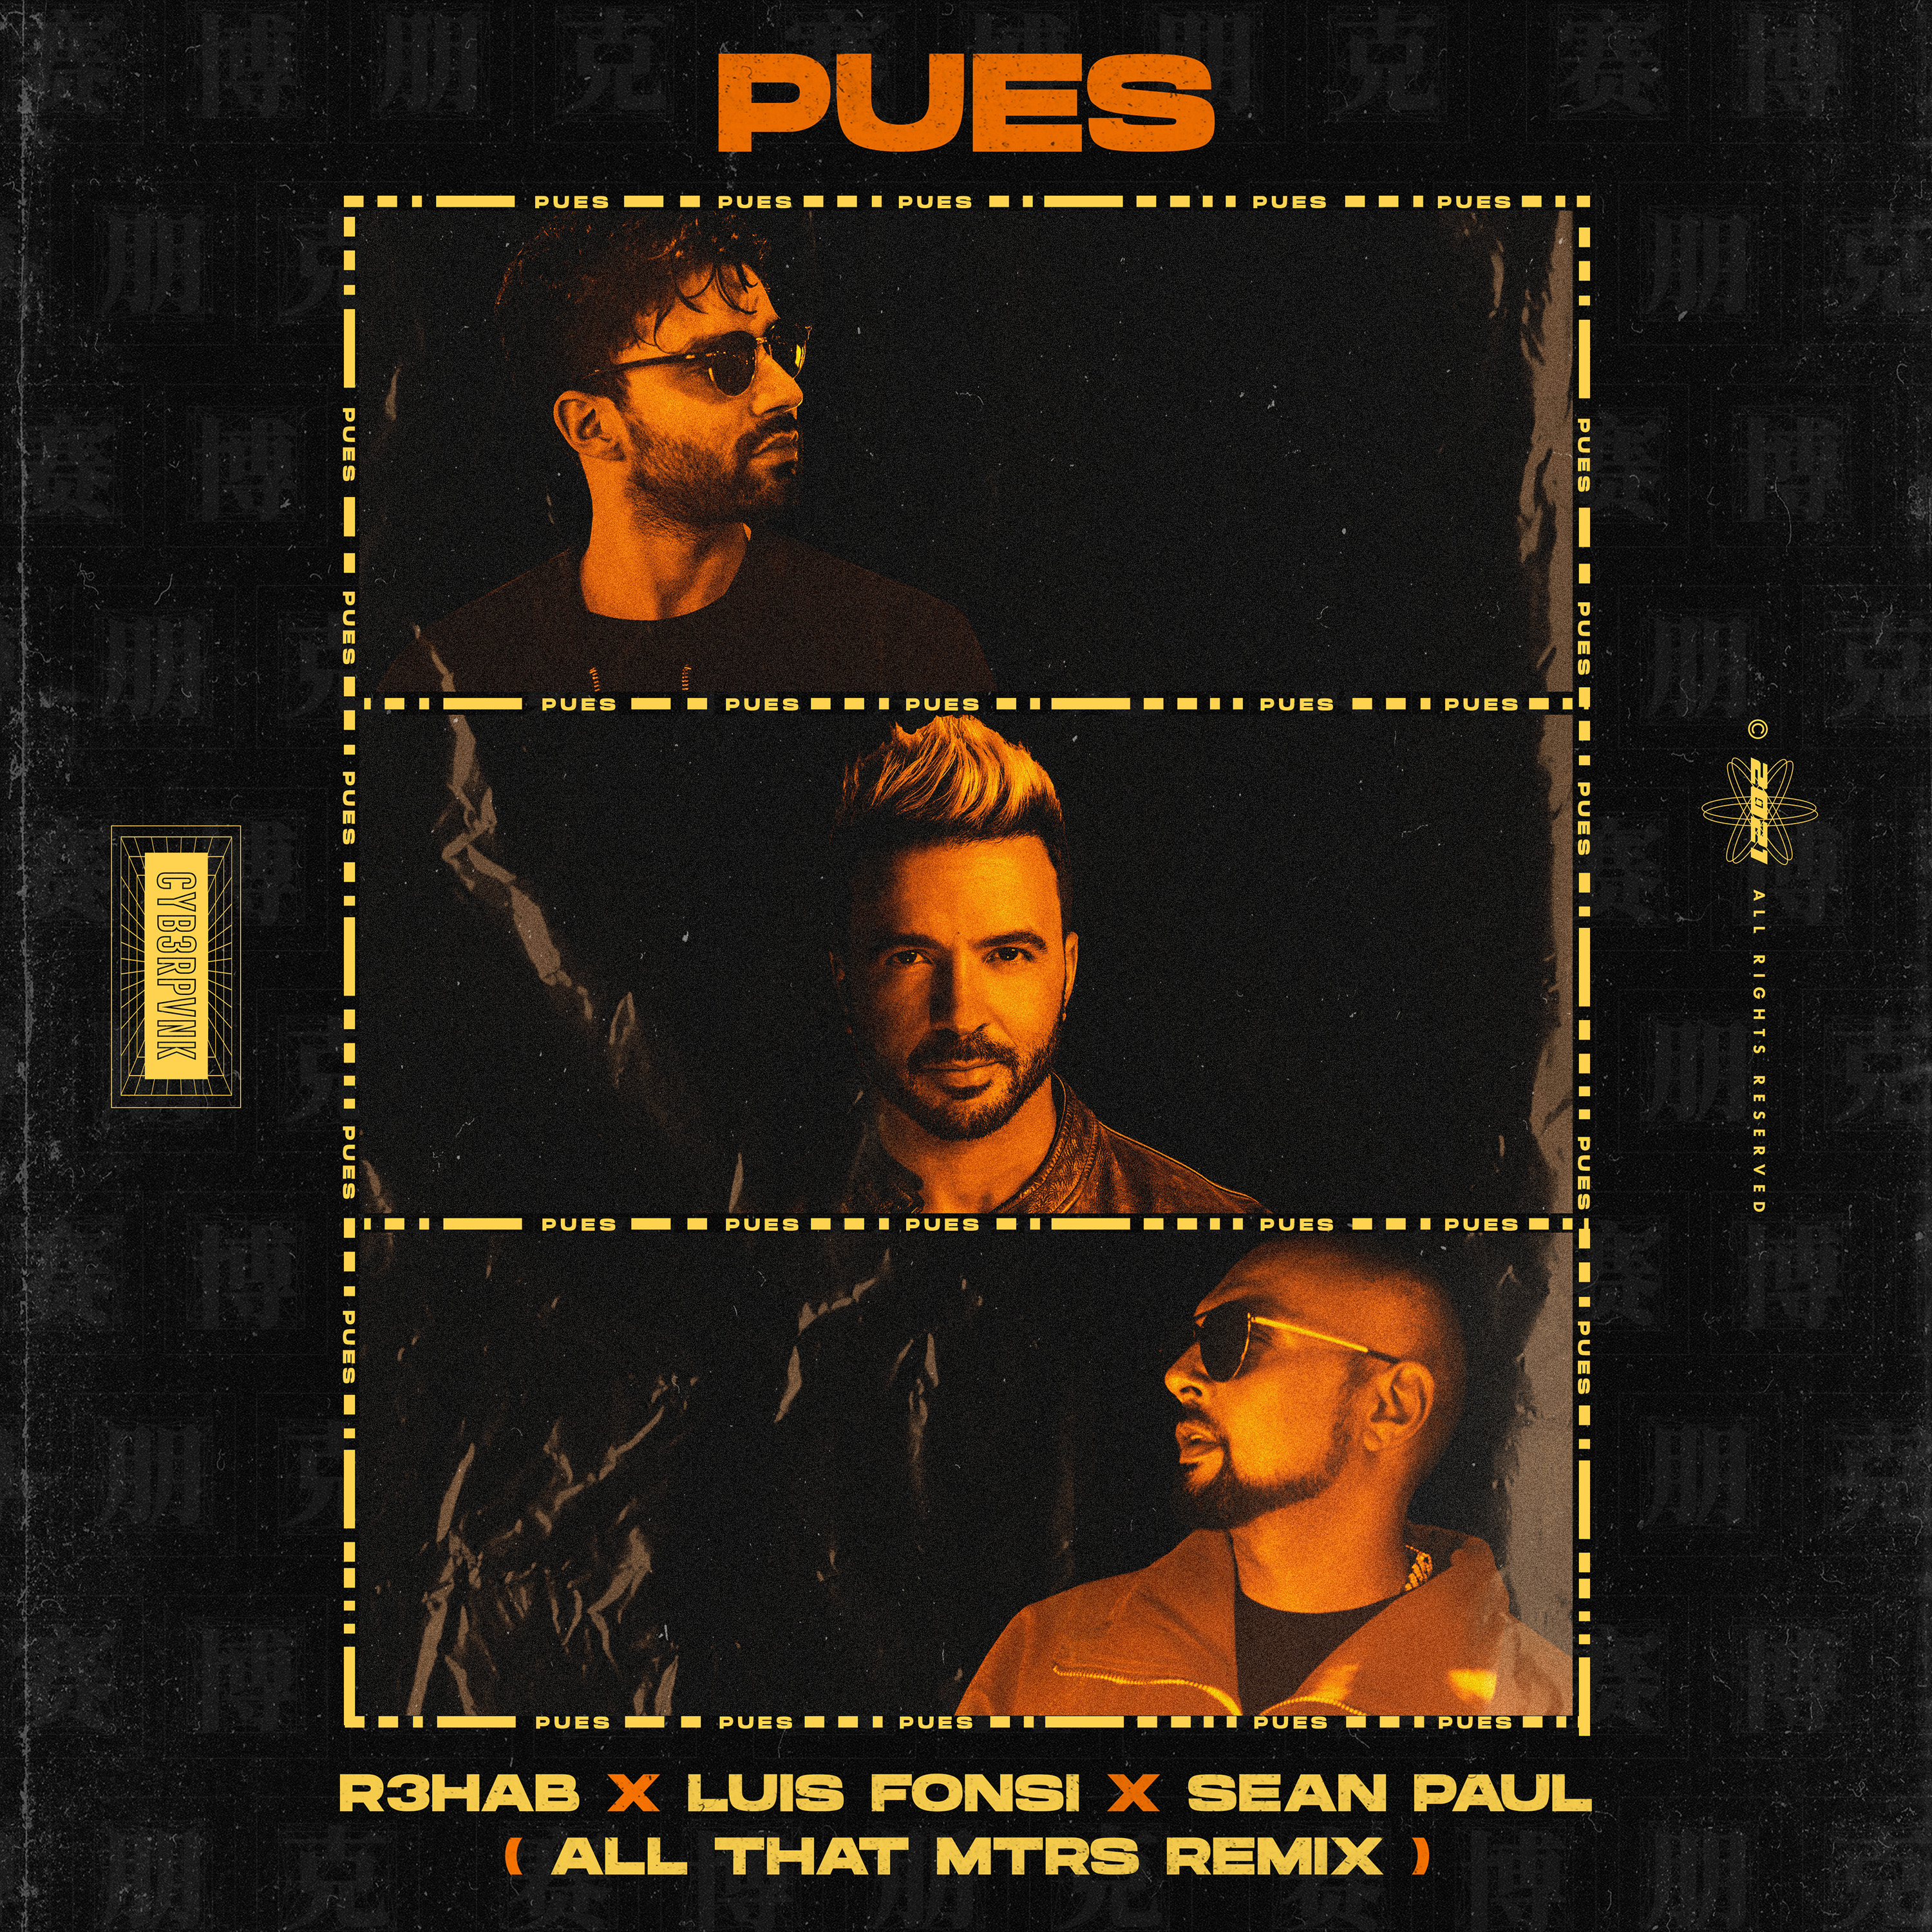 R3HAB, Luis Fonsi & Sean Paul - Pues (All That Mtrs Remix)